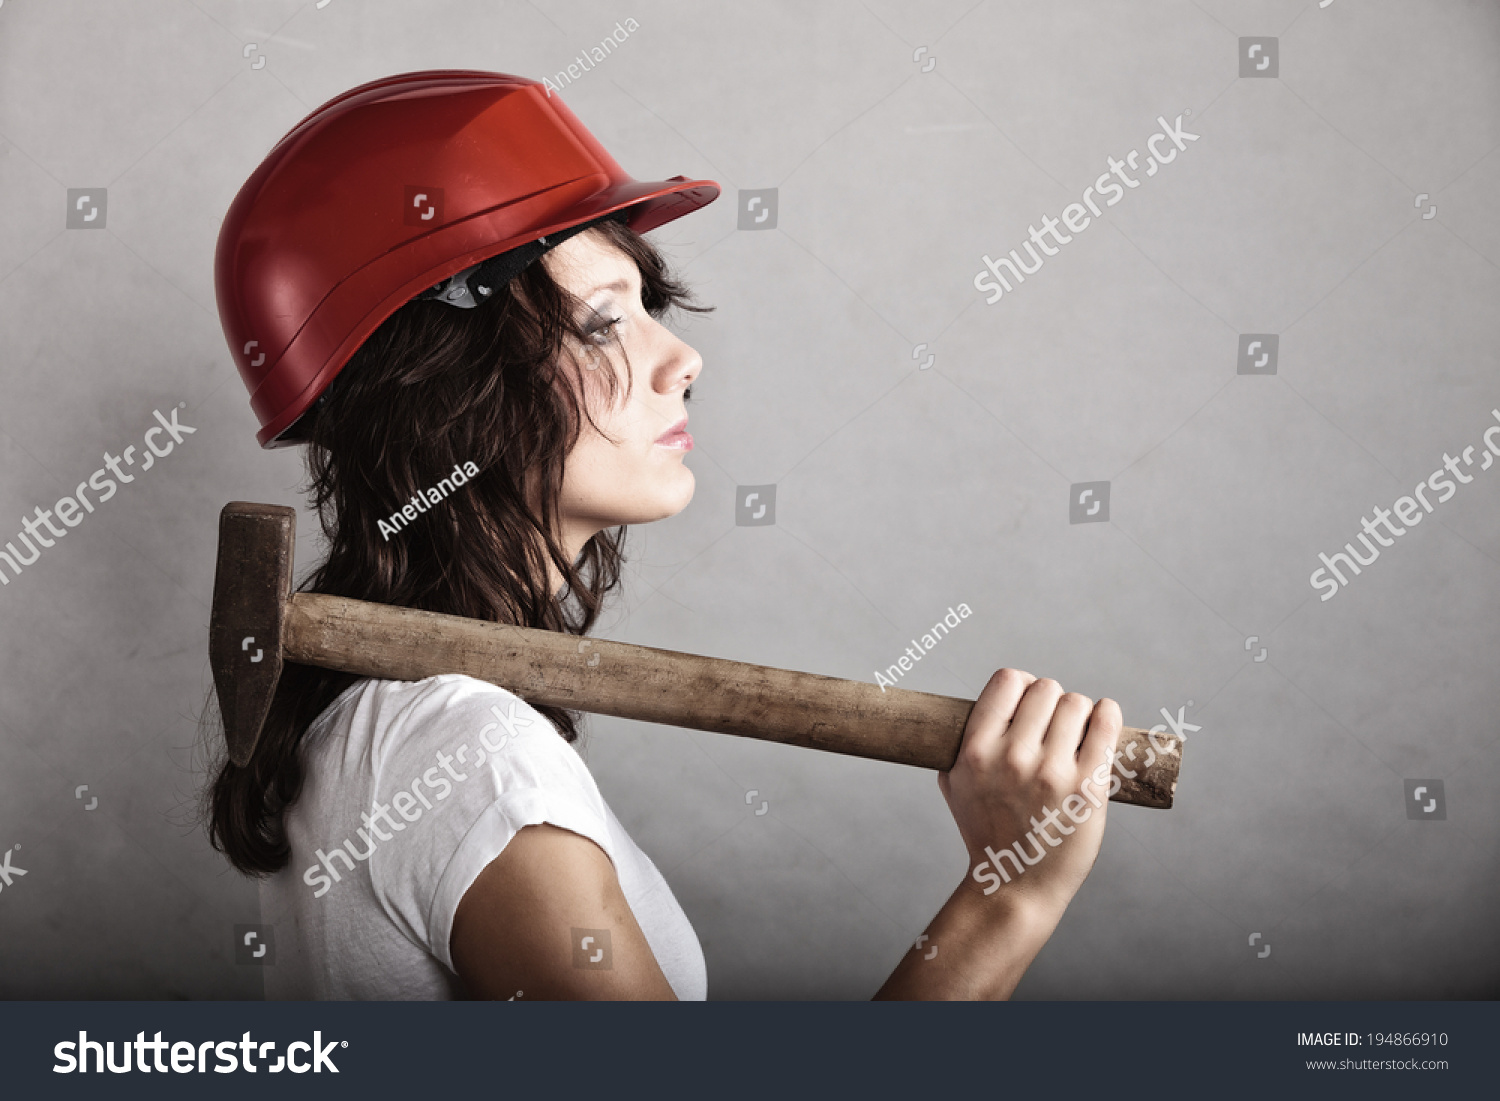 Sex Equality And Feminism Sexy Girl In Safety Helmet Holding Hammer